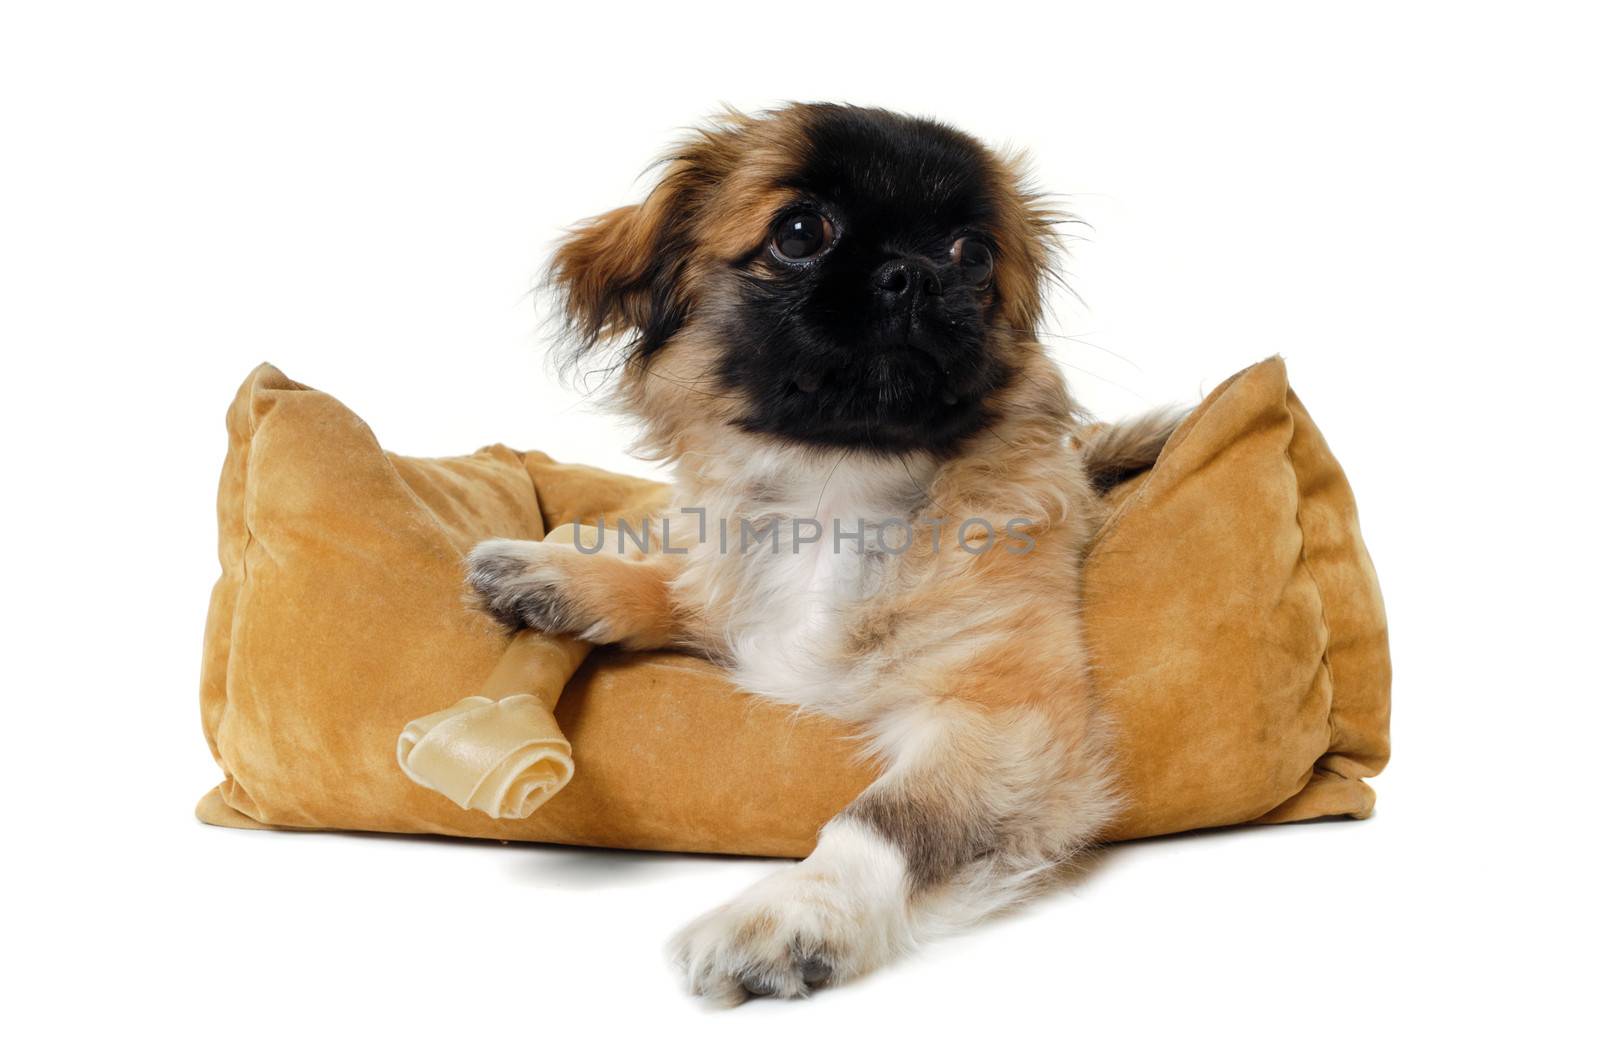 Puppy dog in dog bed. Taken on a white background